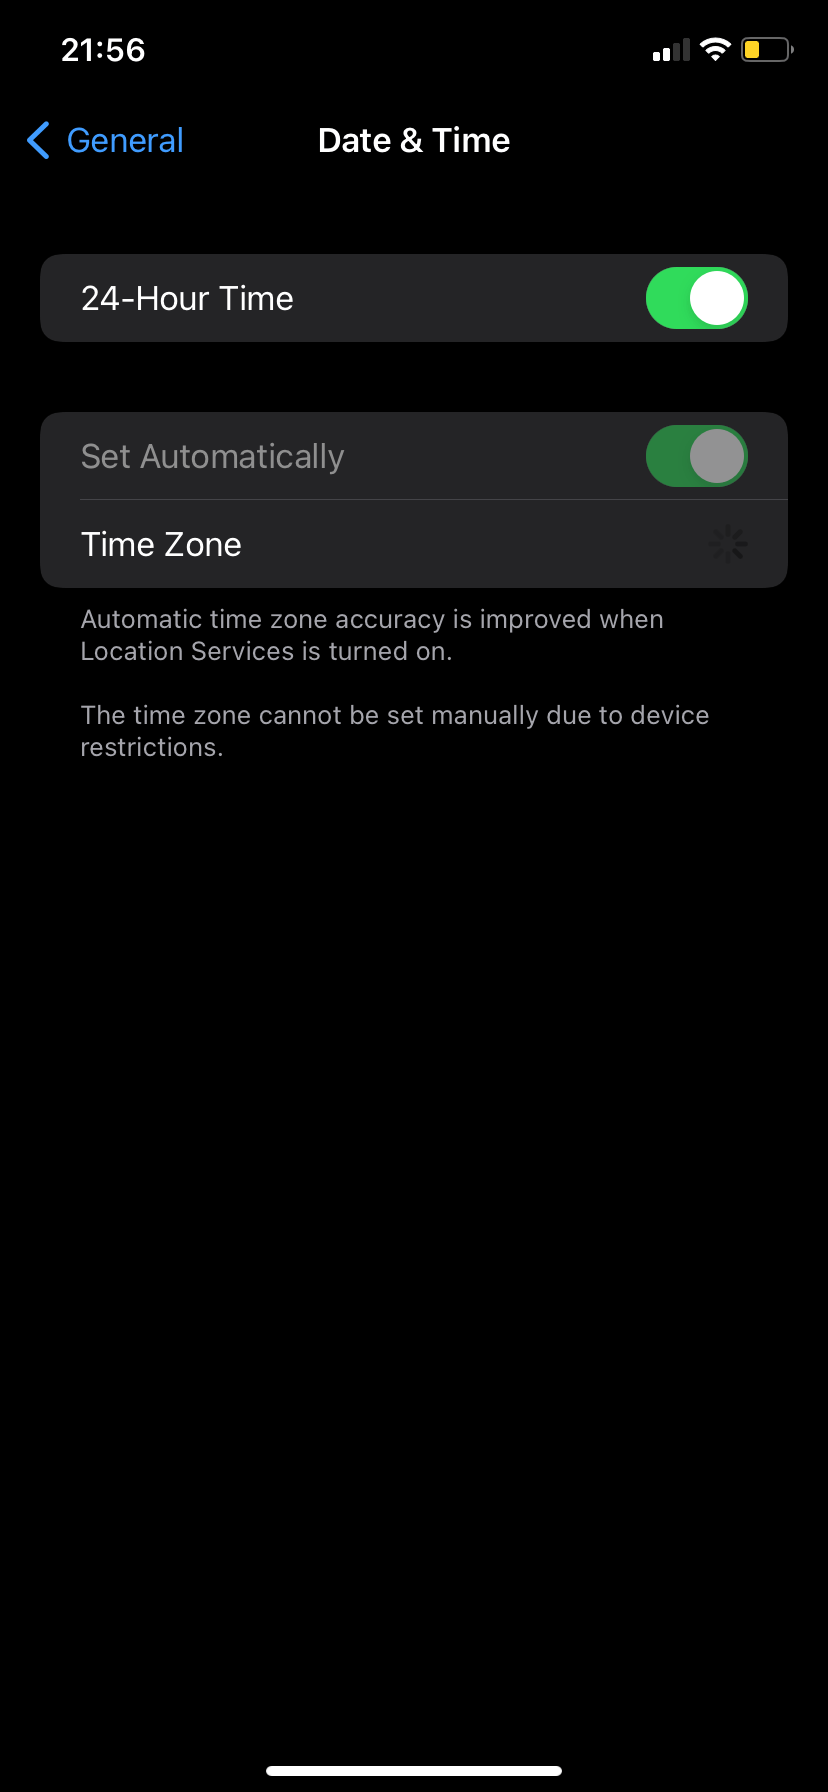 Time zone cannot be set manually error screen